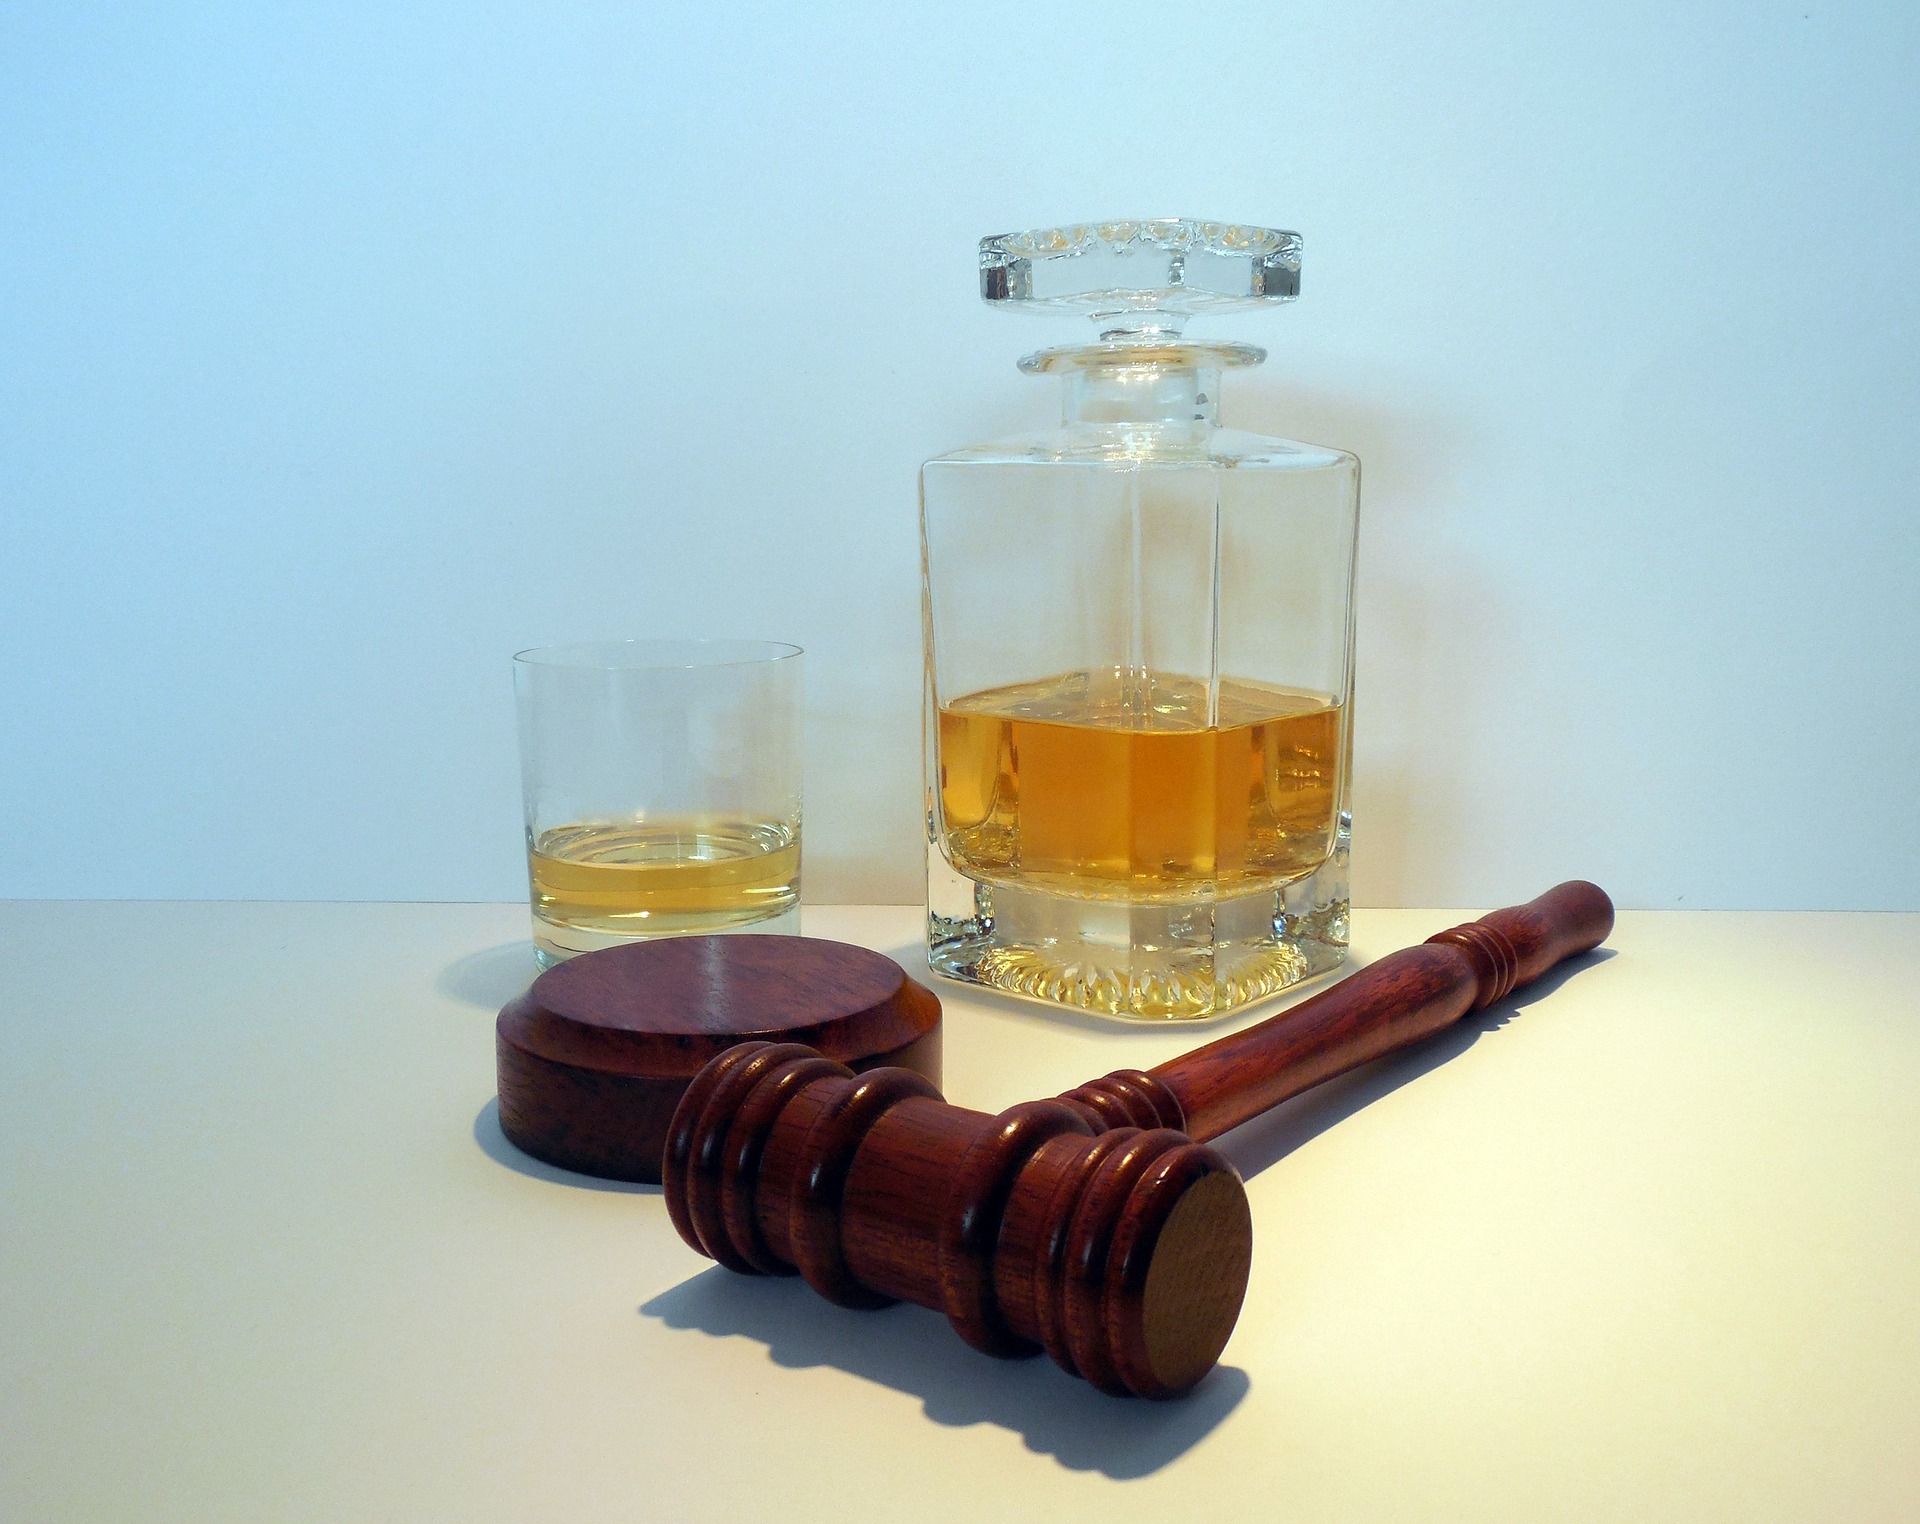 When Can Bars Be Held Liable for DUI Accidents in Florida?